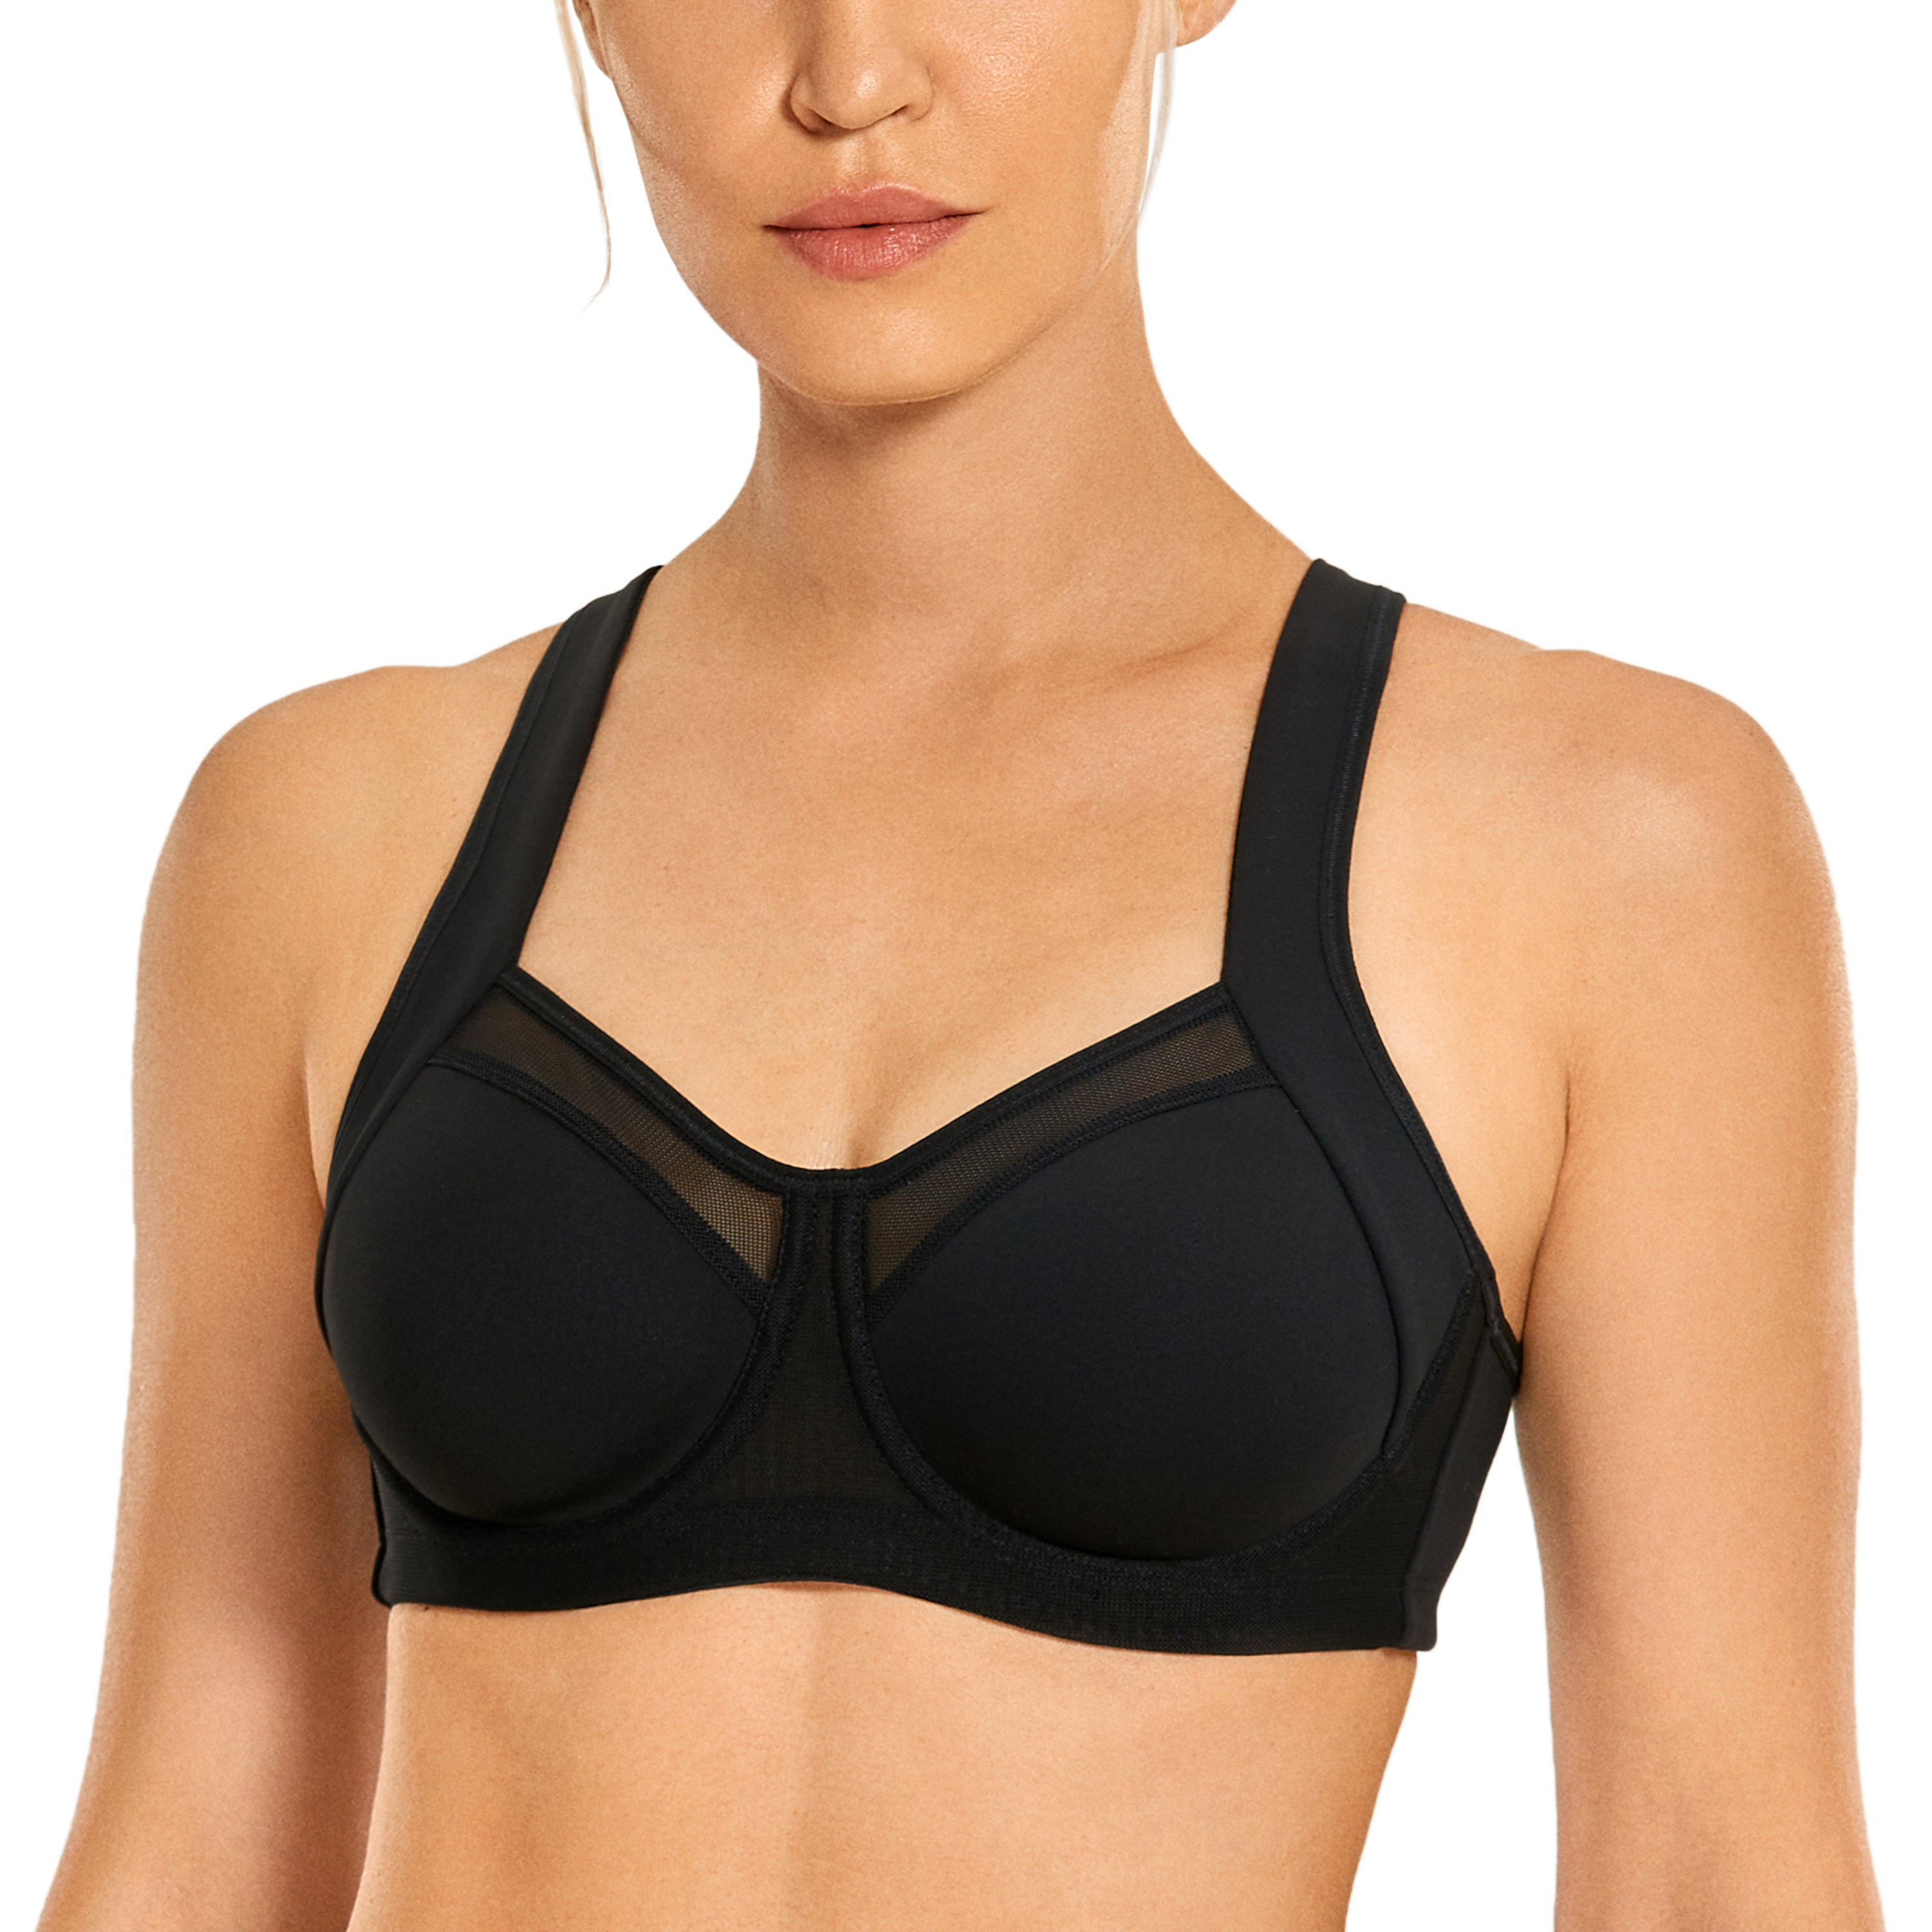 SYROKAN High Impact Sports Bras for Women High Support